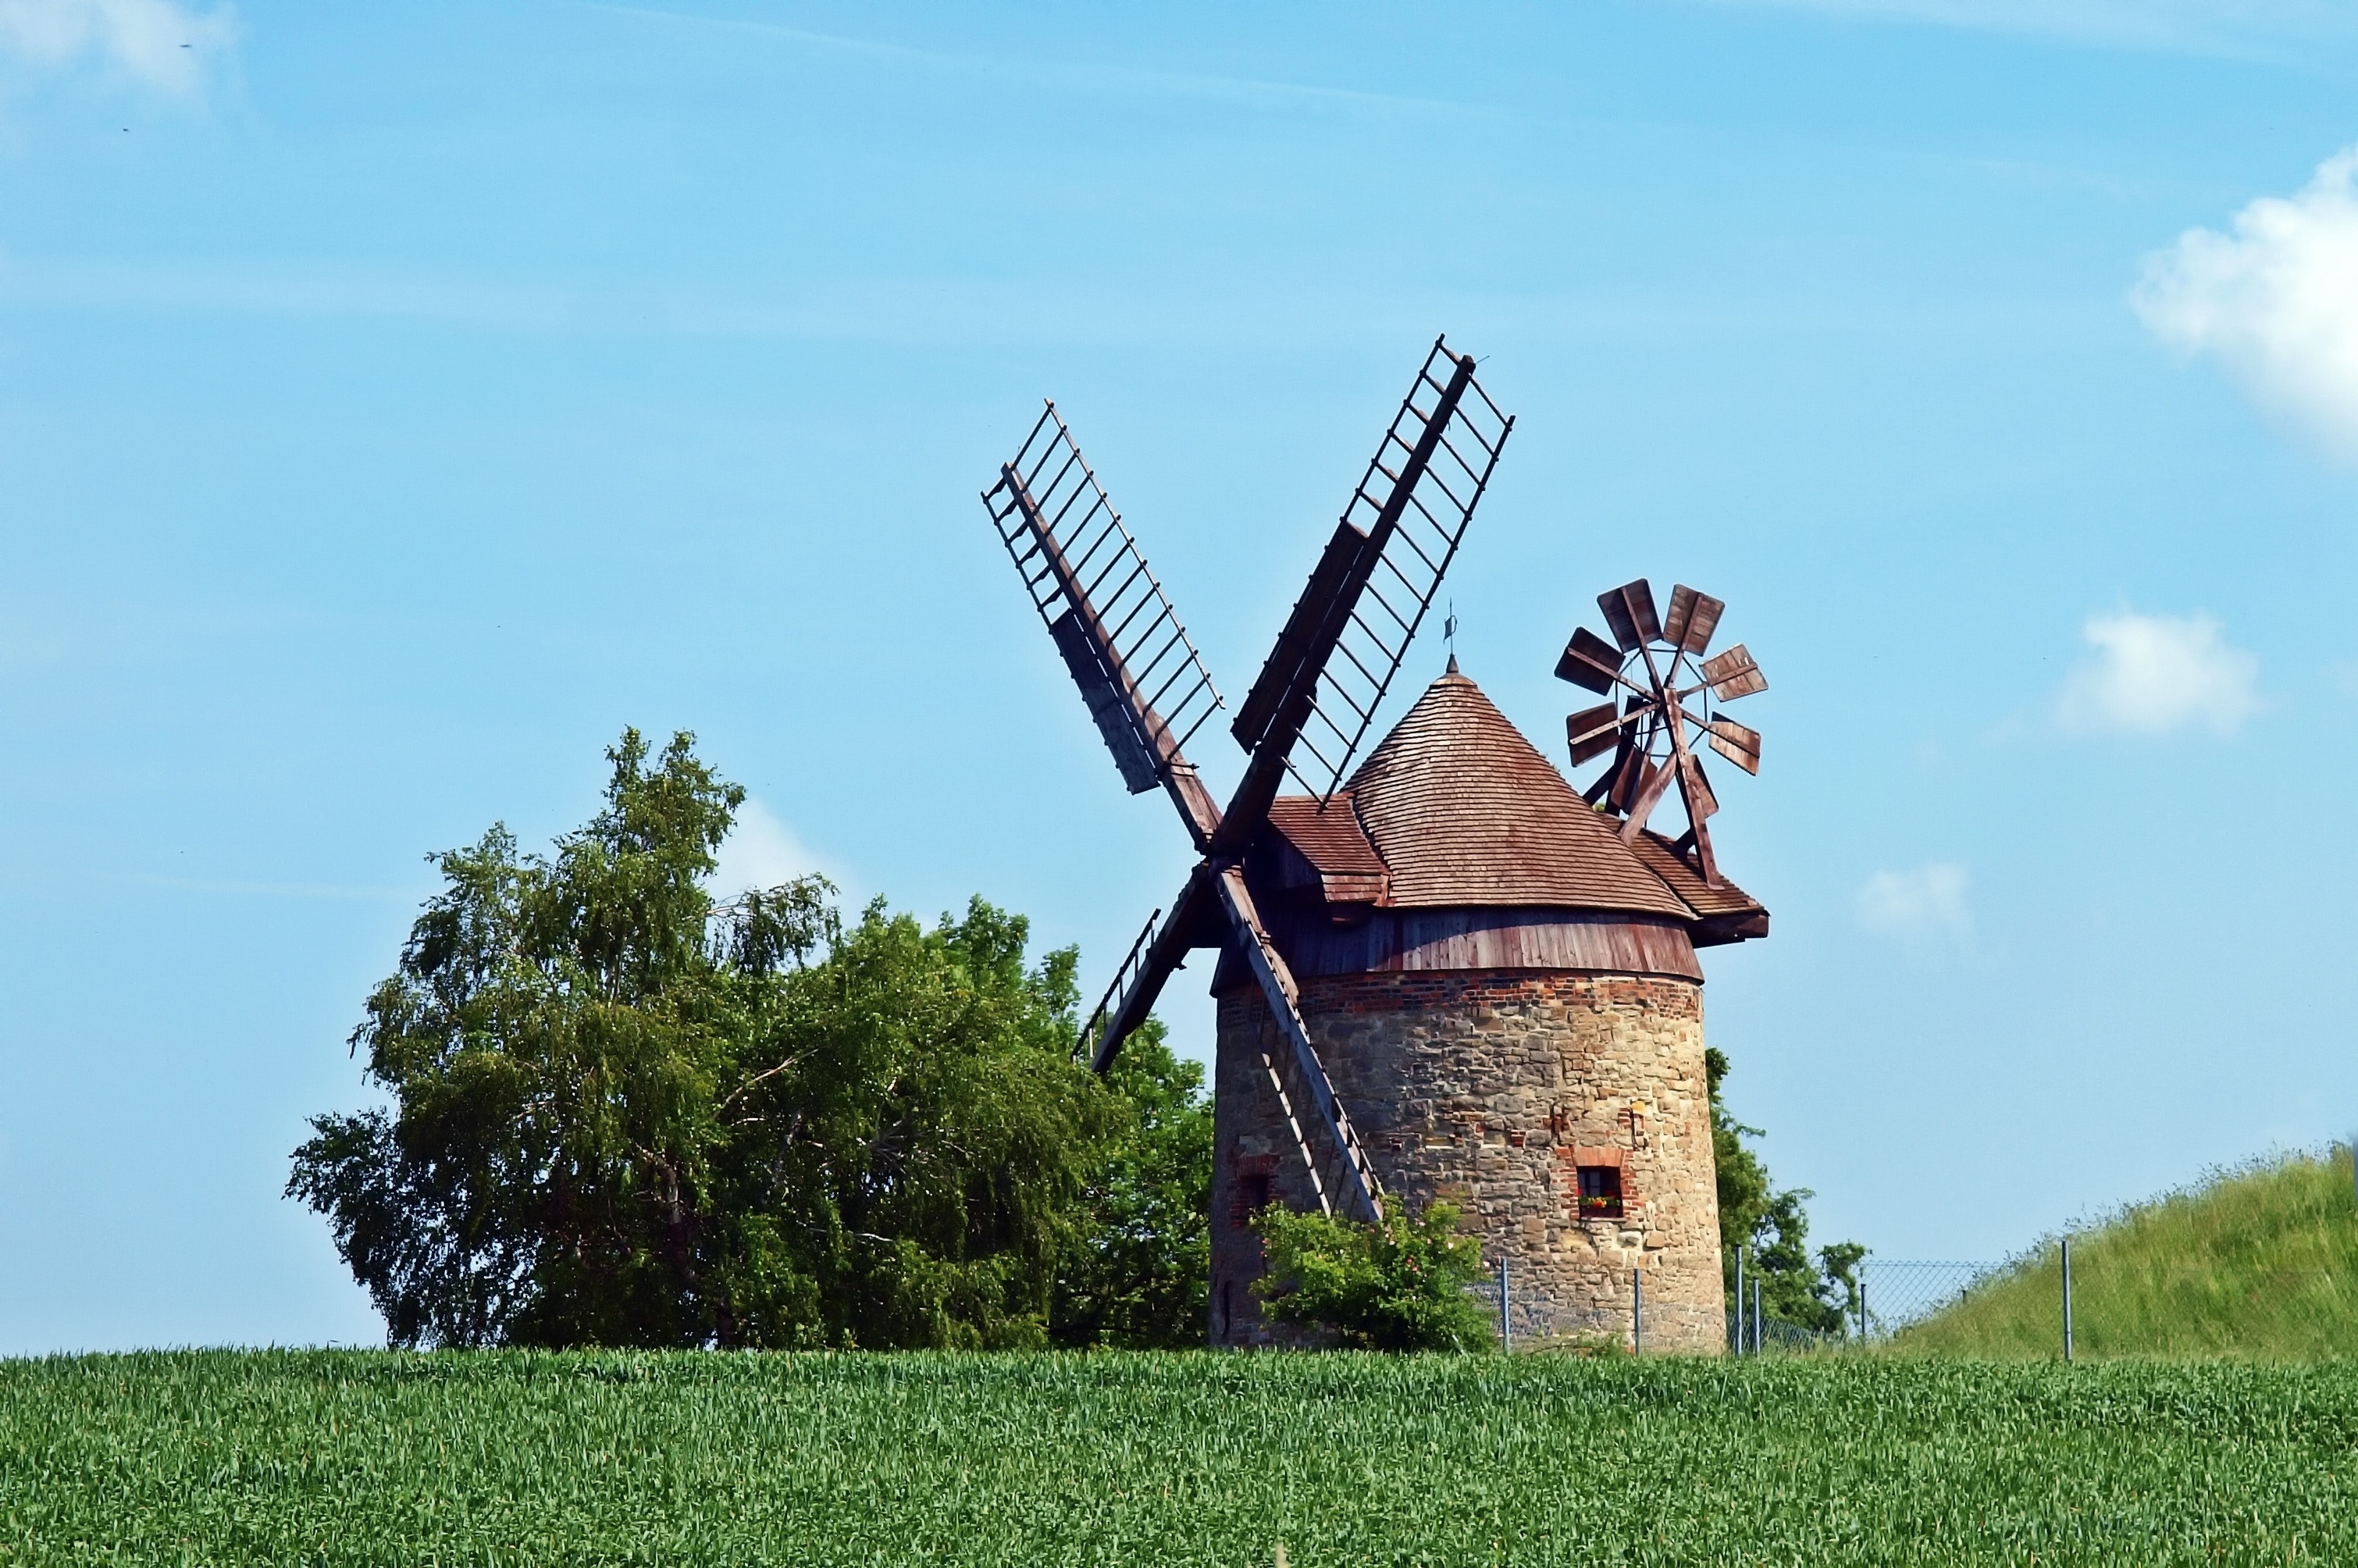 Brown and Gray Windmill Beside Green Tree Under Blue Cloudy Sky during Day Time, Agriculture, Mill, Wind, Travel, HQ Photo